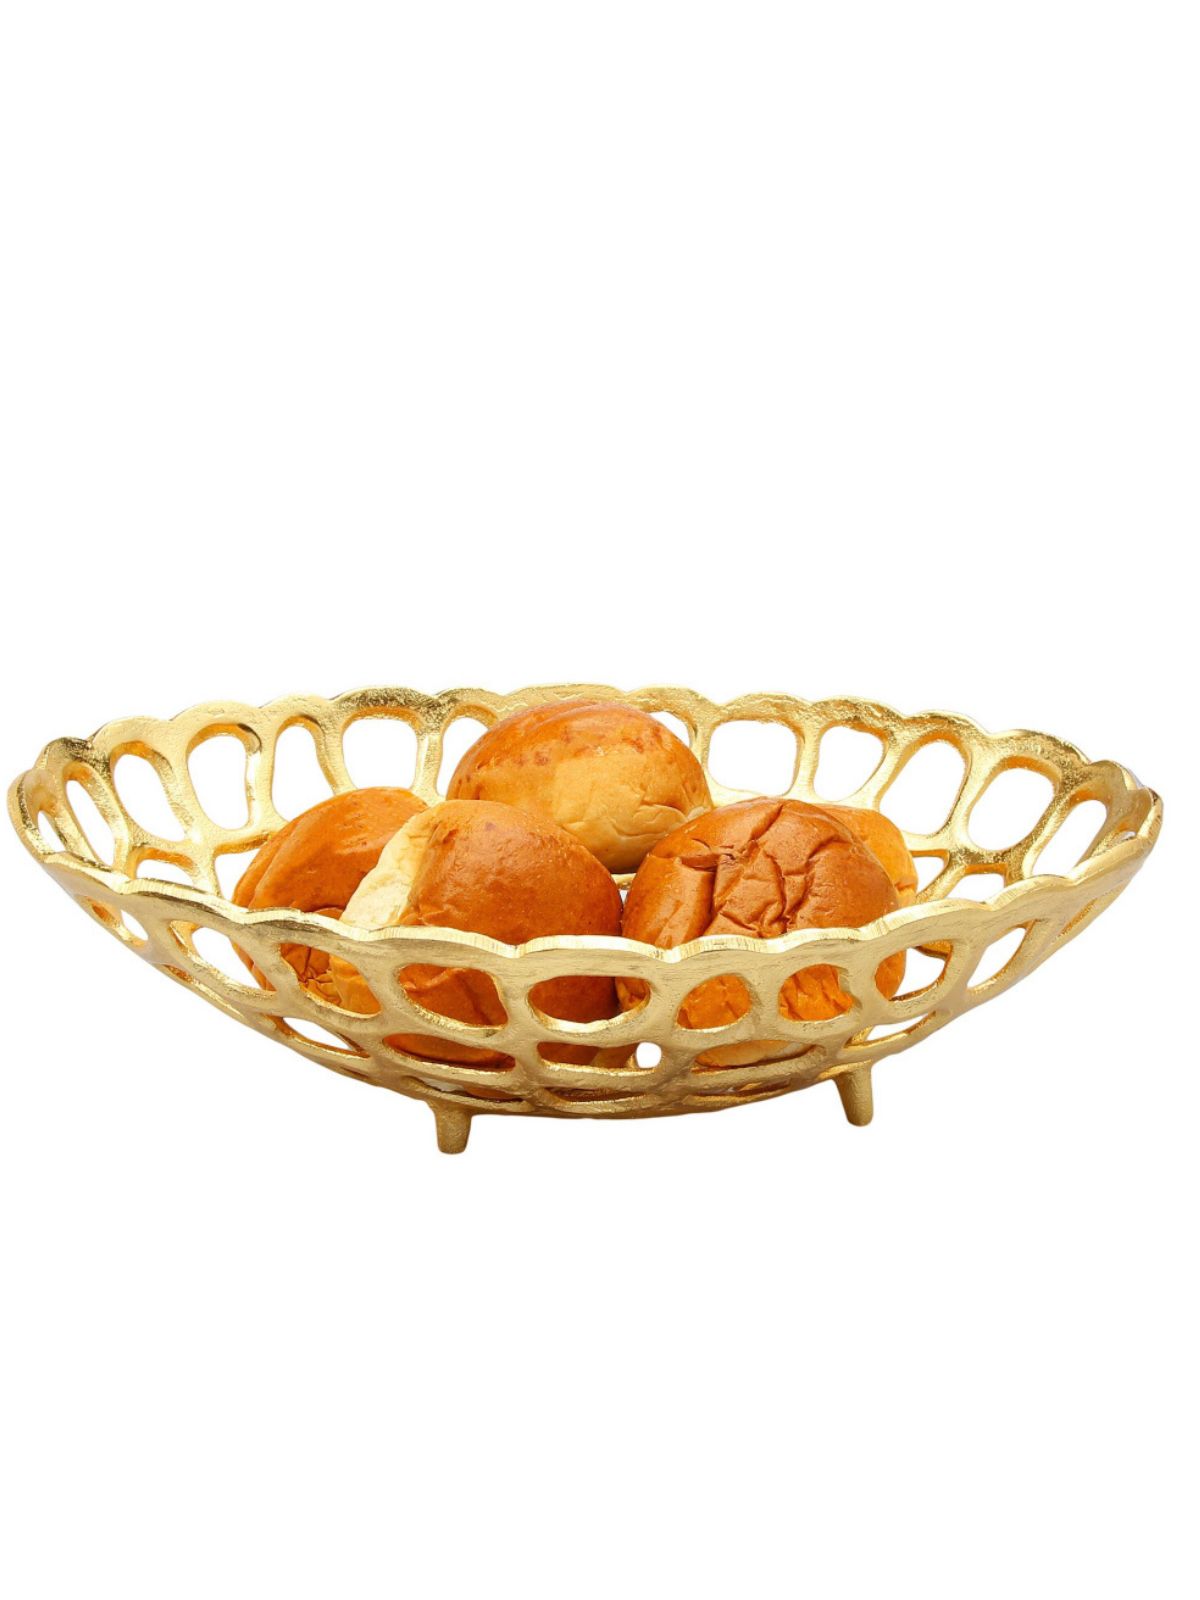 Welcome your diners with freshly baked breads showcased in the magnificently designed Ashby bread holder. 